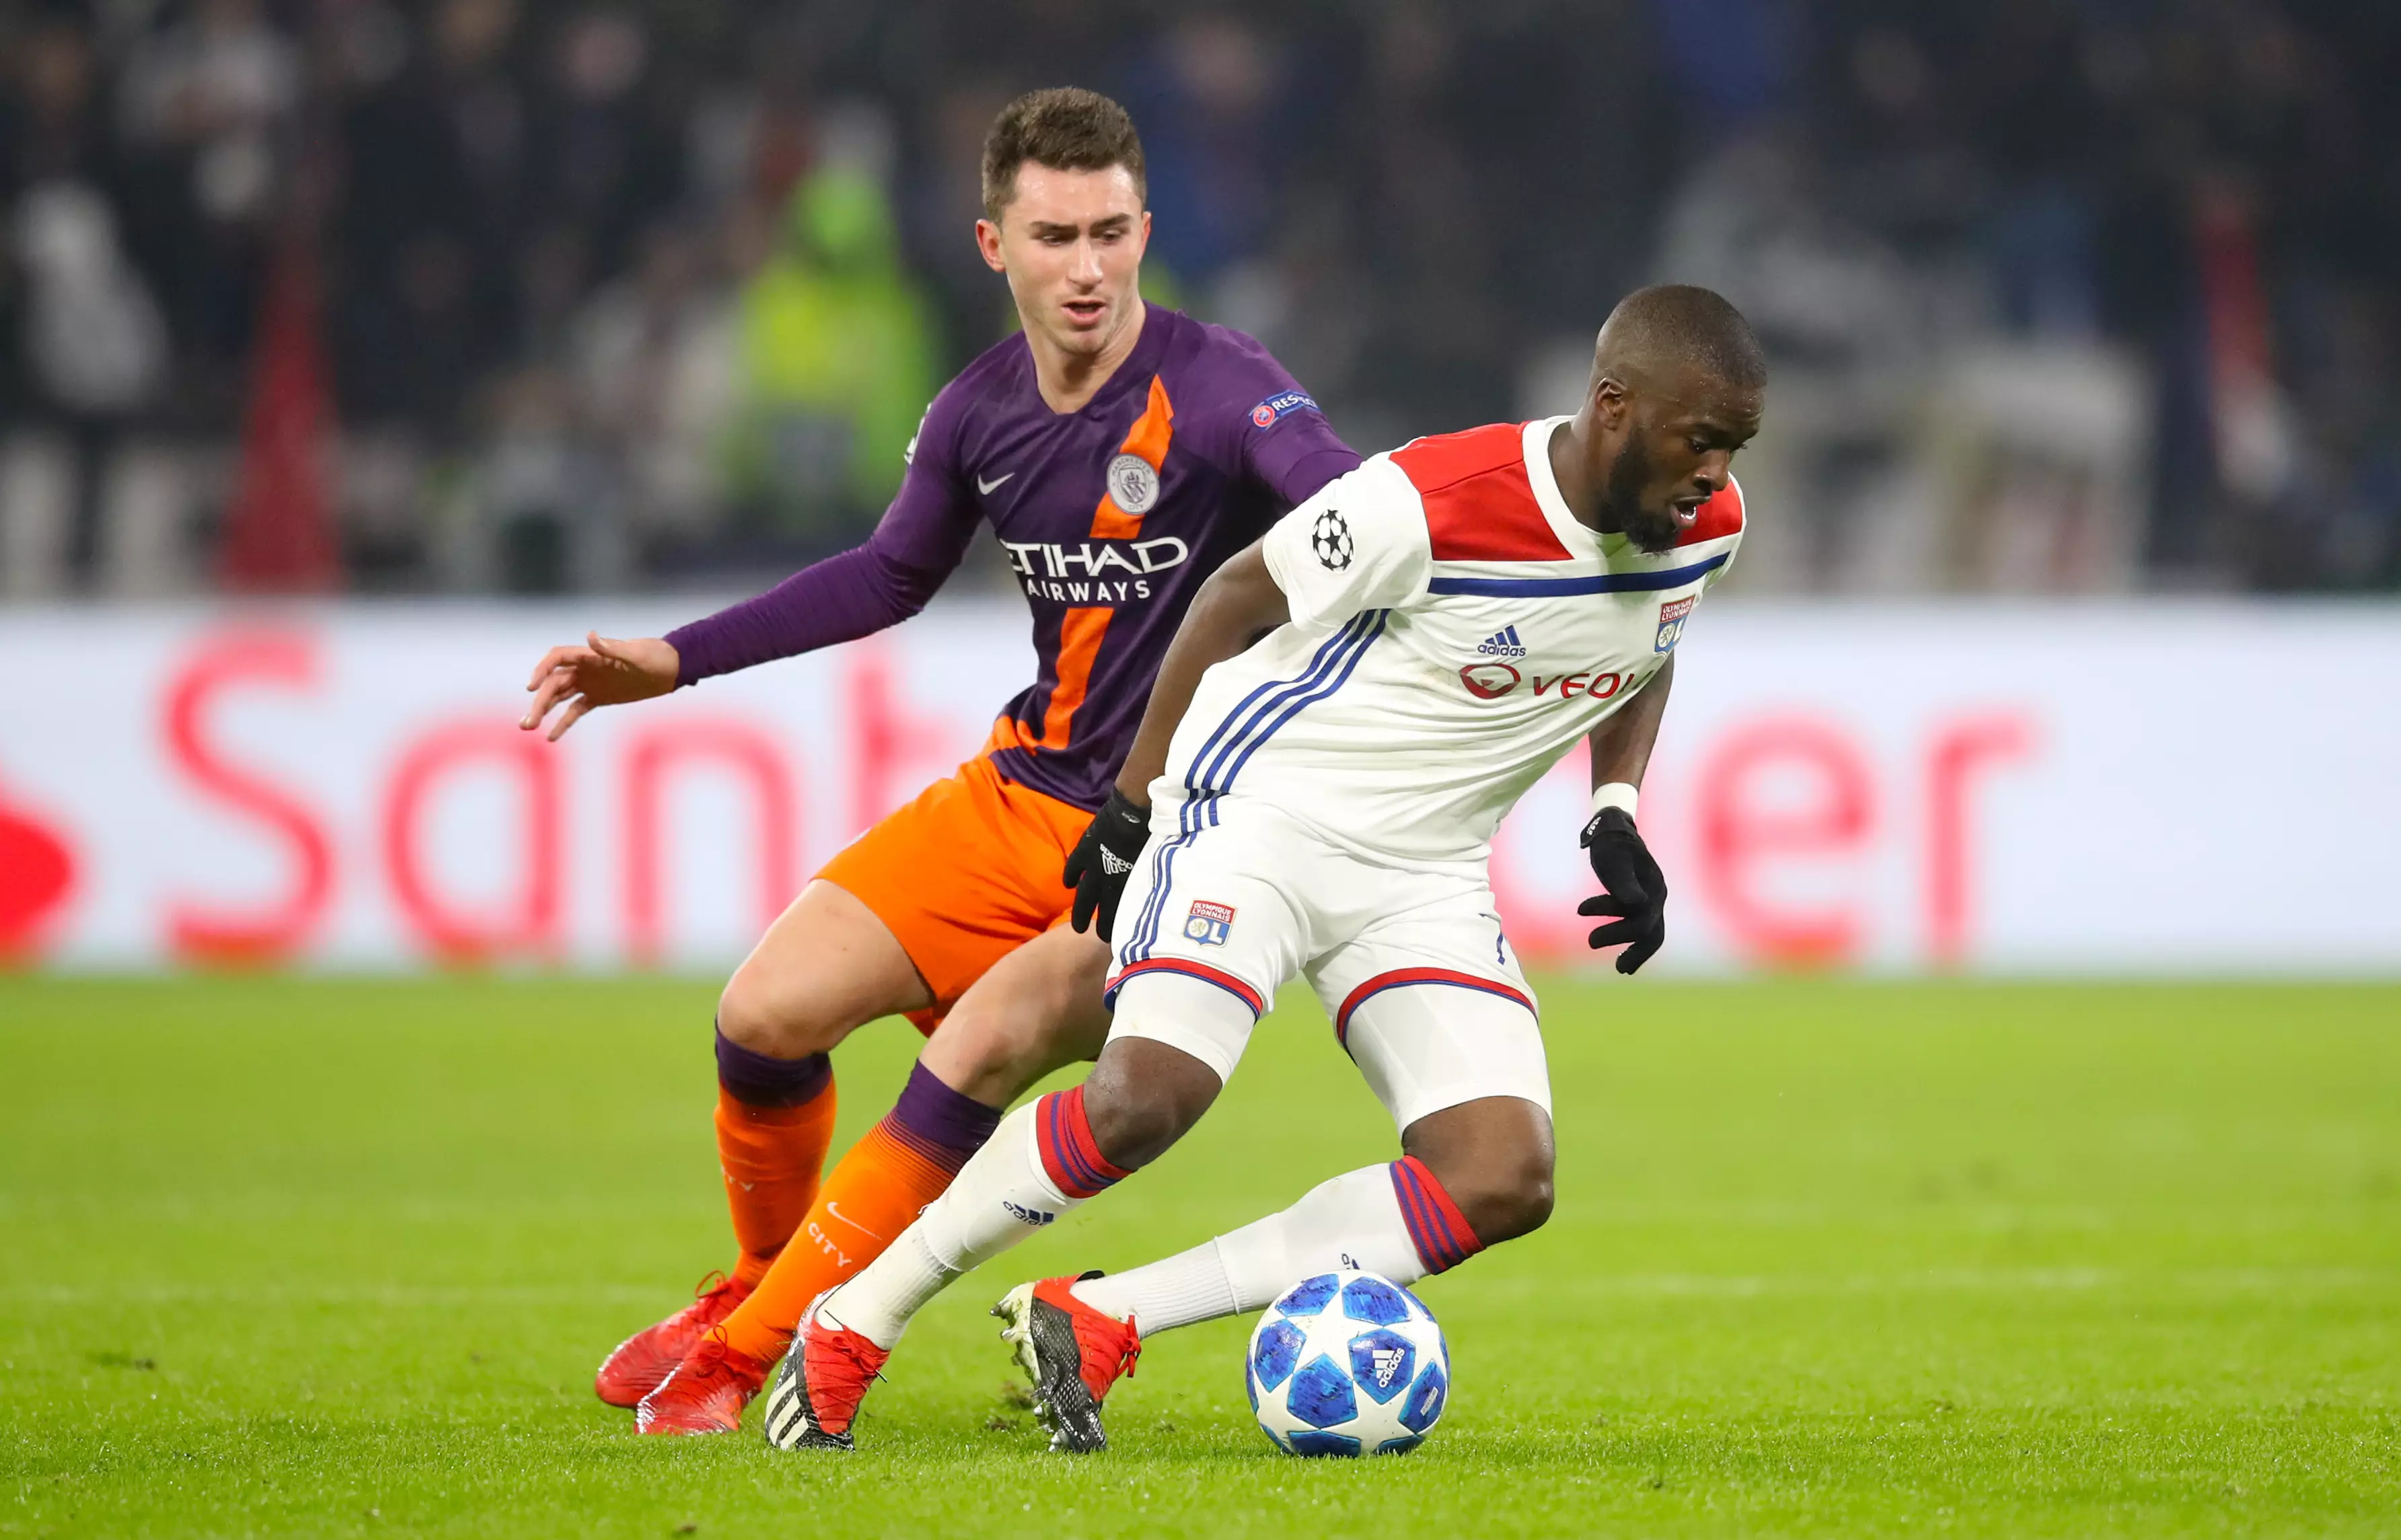 Ndombele impressed in two games against Manchester City in the Champions League last season. Image: PA Images